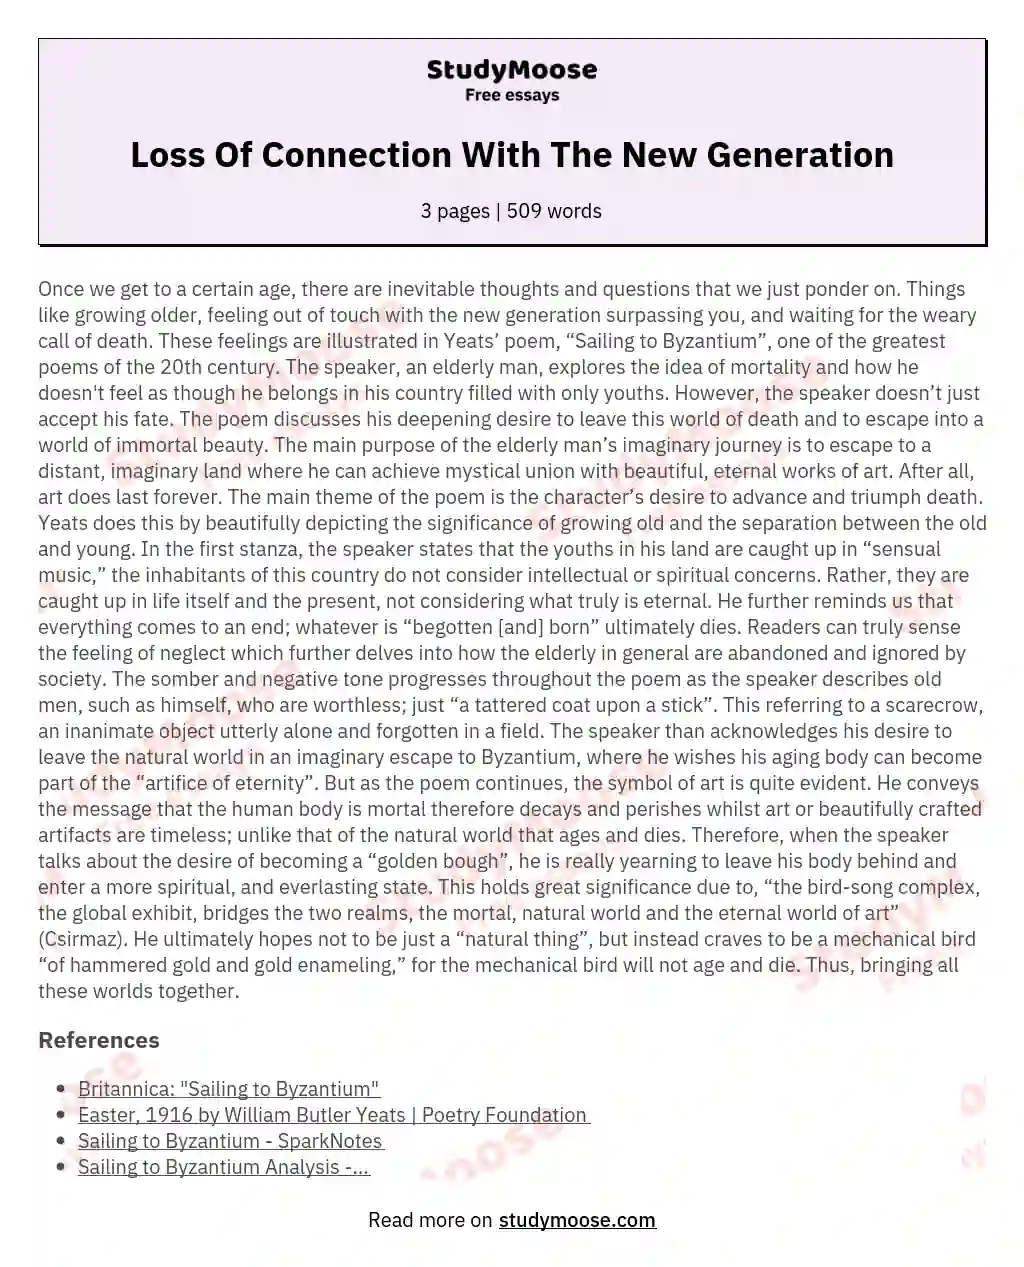 Loss Of Connection With The New Generation essay